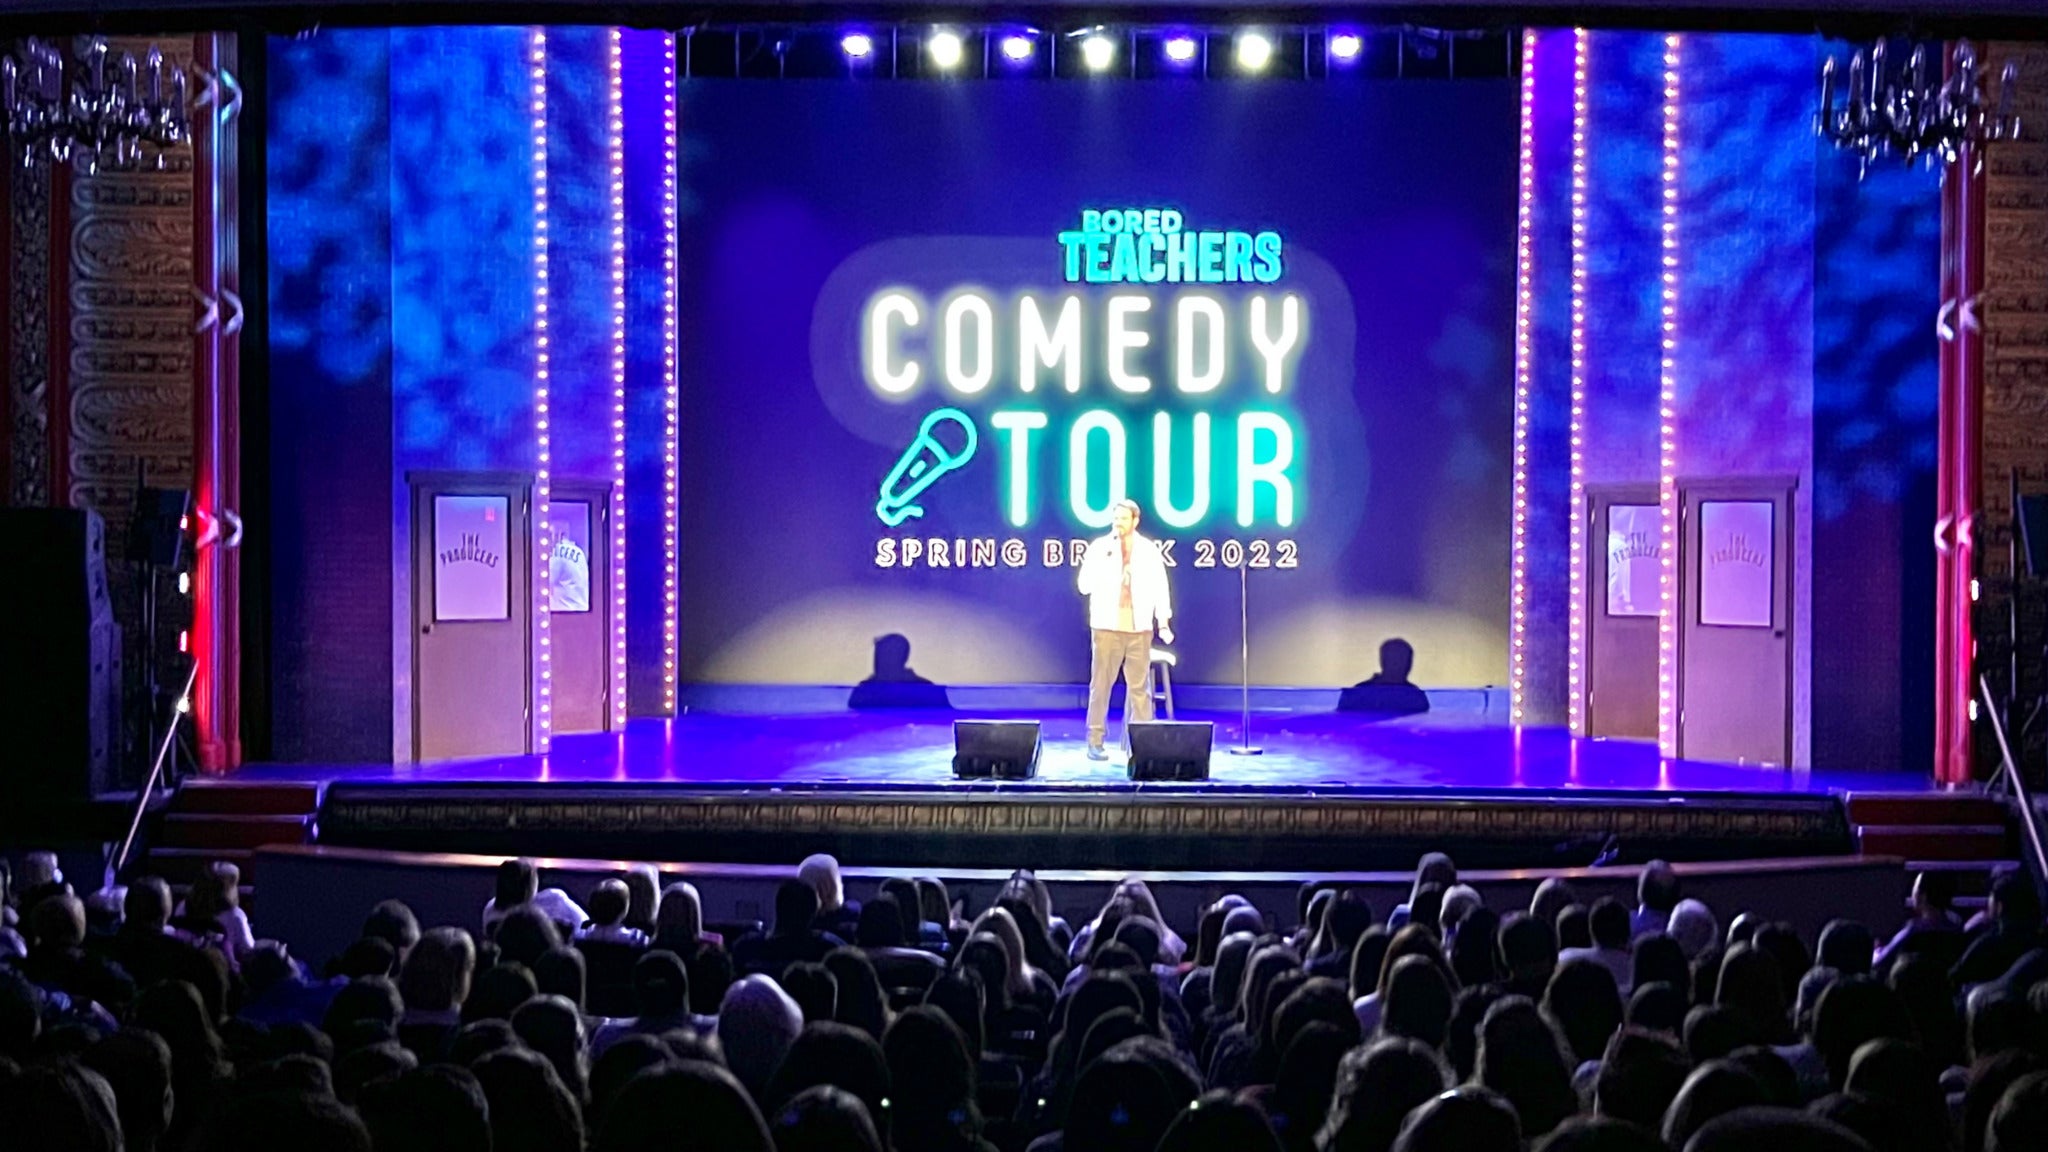 Bored Teachers: We Can't Make This Stuff Up! Comedy Tour pre-sale password for performance tickets in Atlantic City, NJ (Harrah's Resort Atlantic City)